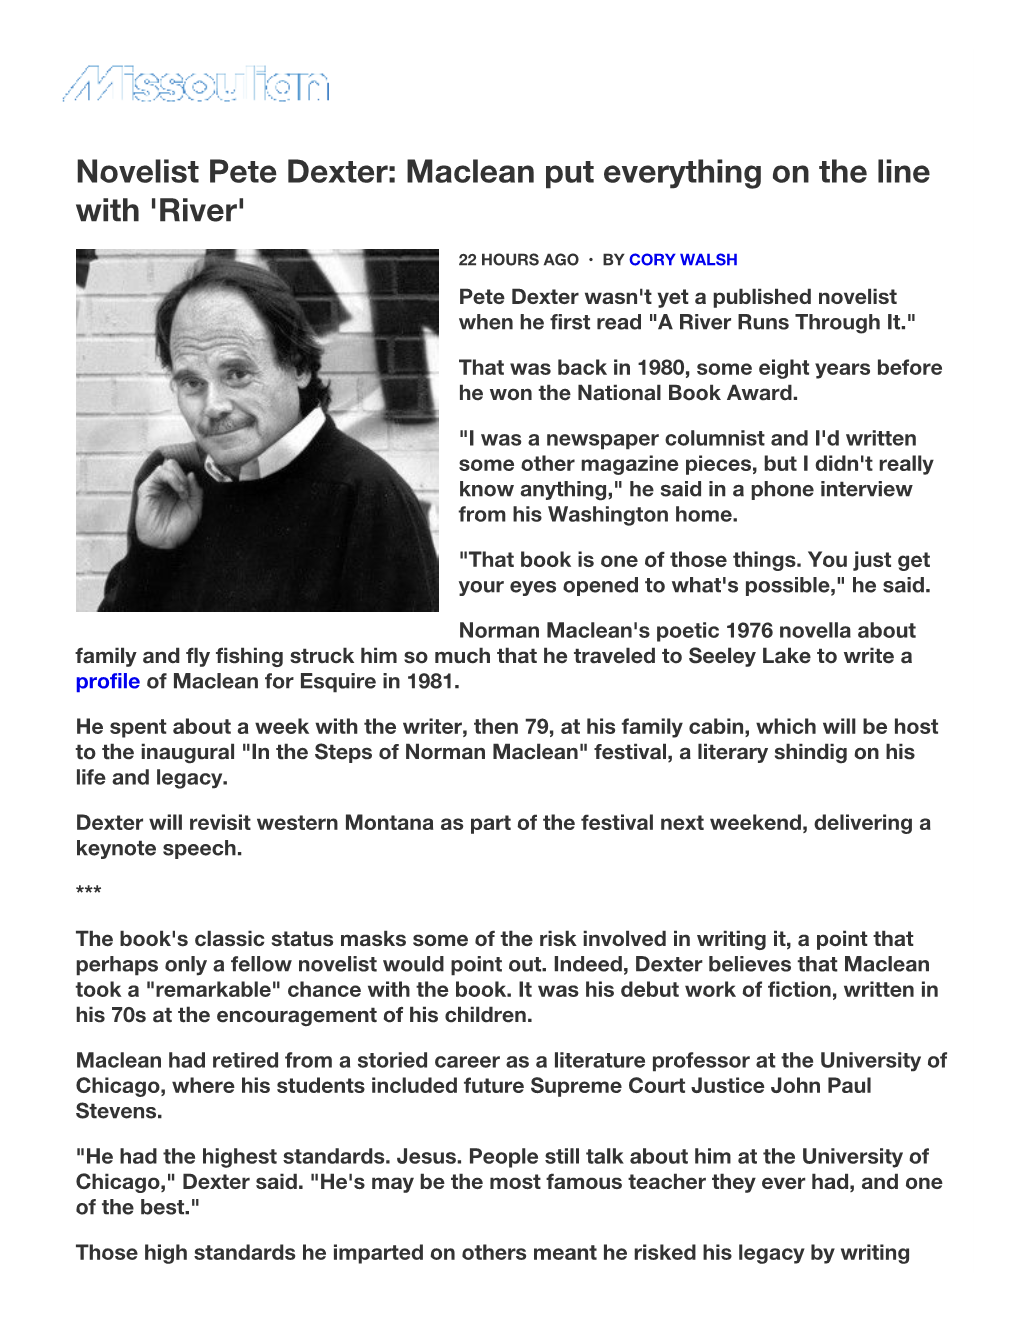 Novelist Pete Dexter: Maclean Put Everything on the Line with 'River'